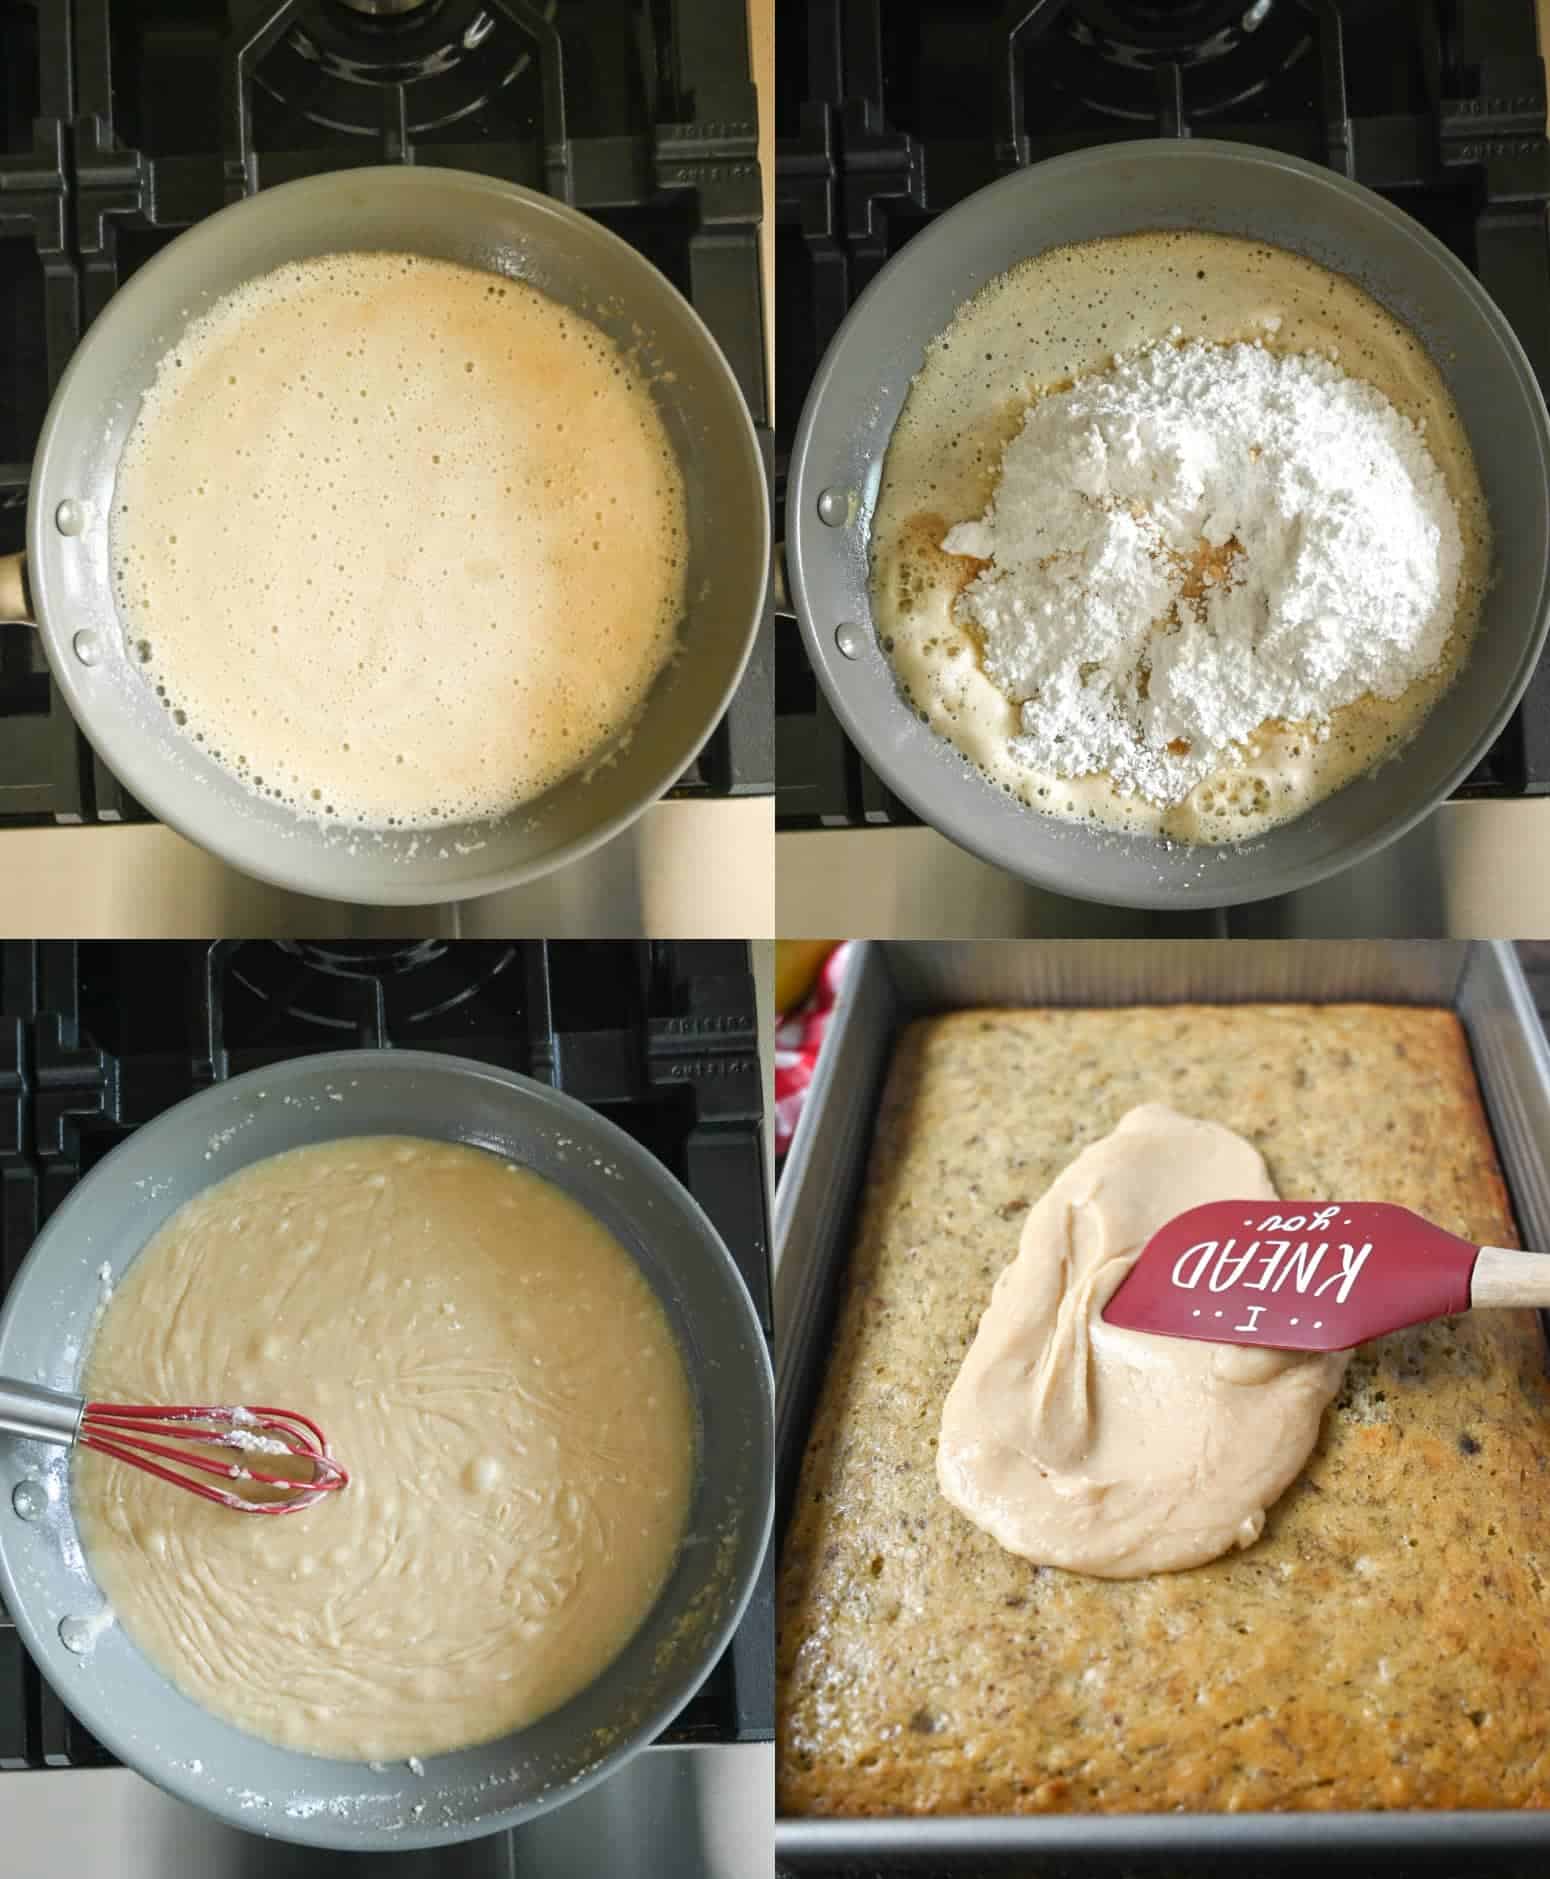 Four process photos. First one butter that has been melted and starting to brown in a skillet. Secone one, powdered suger poured into the brown butter. Third one, sugar and brown butter all whisked together. Fourth one, brown butter frosting spread on top of the baked cake.